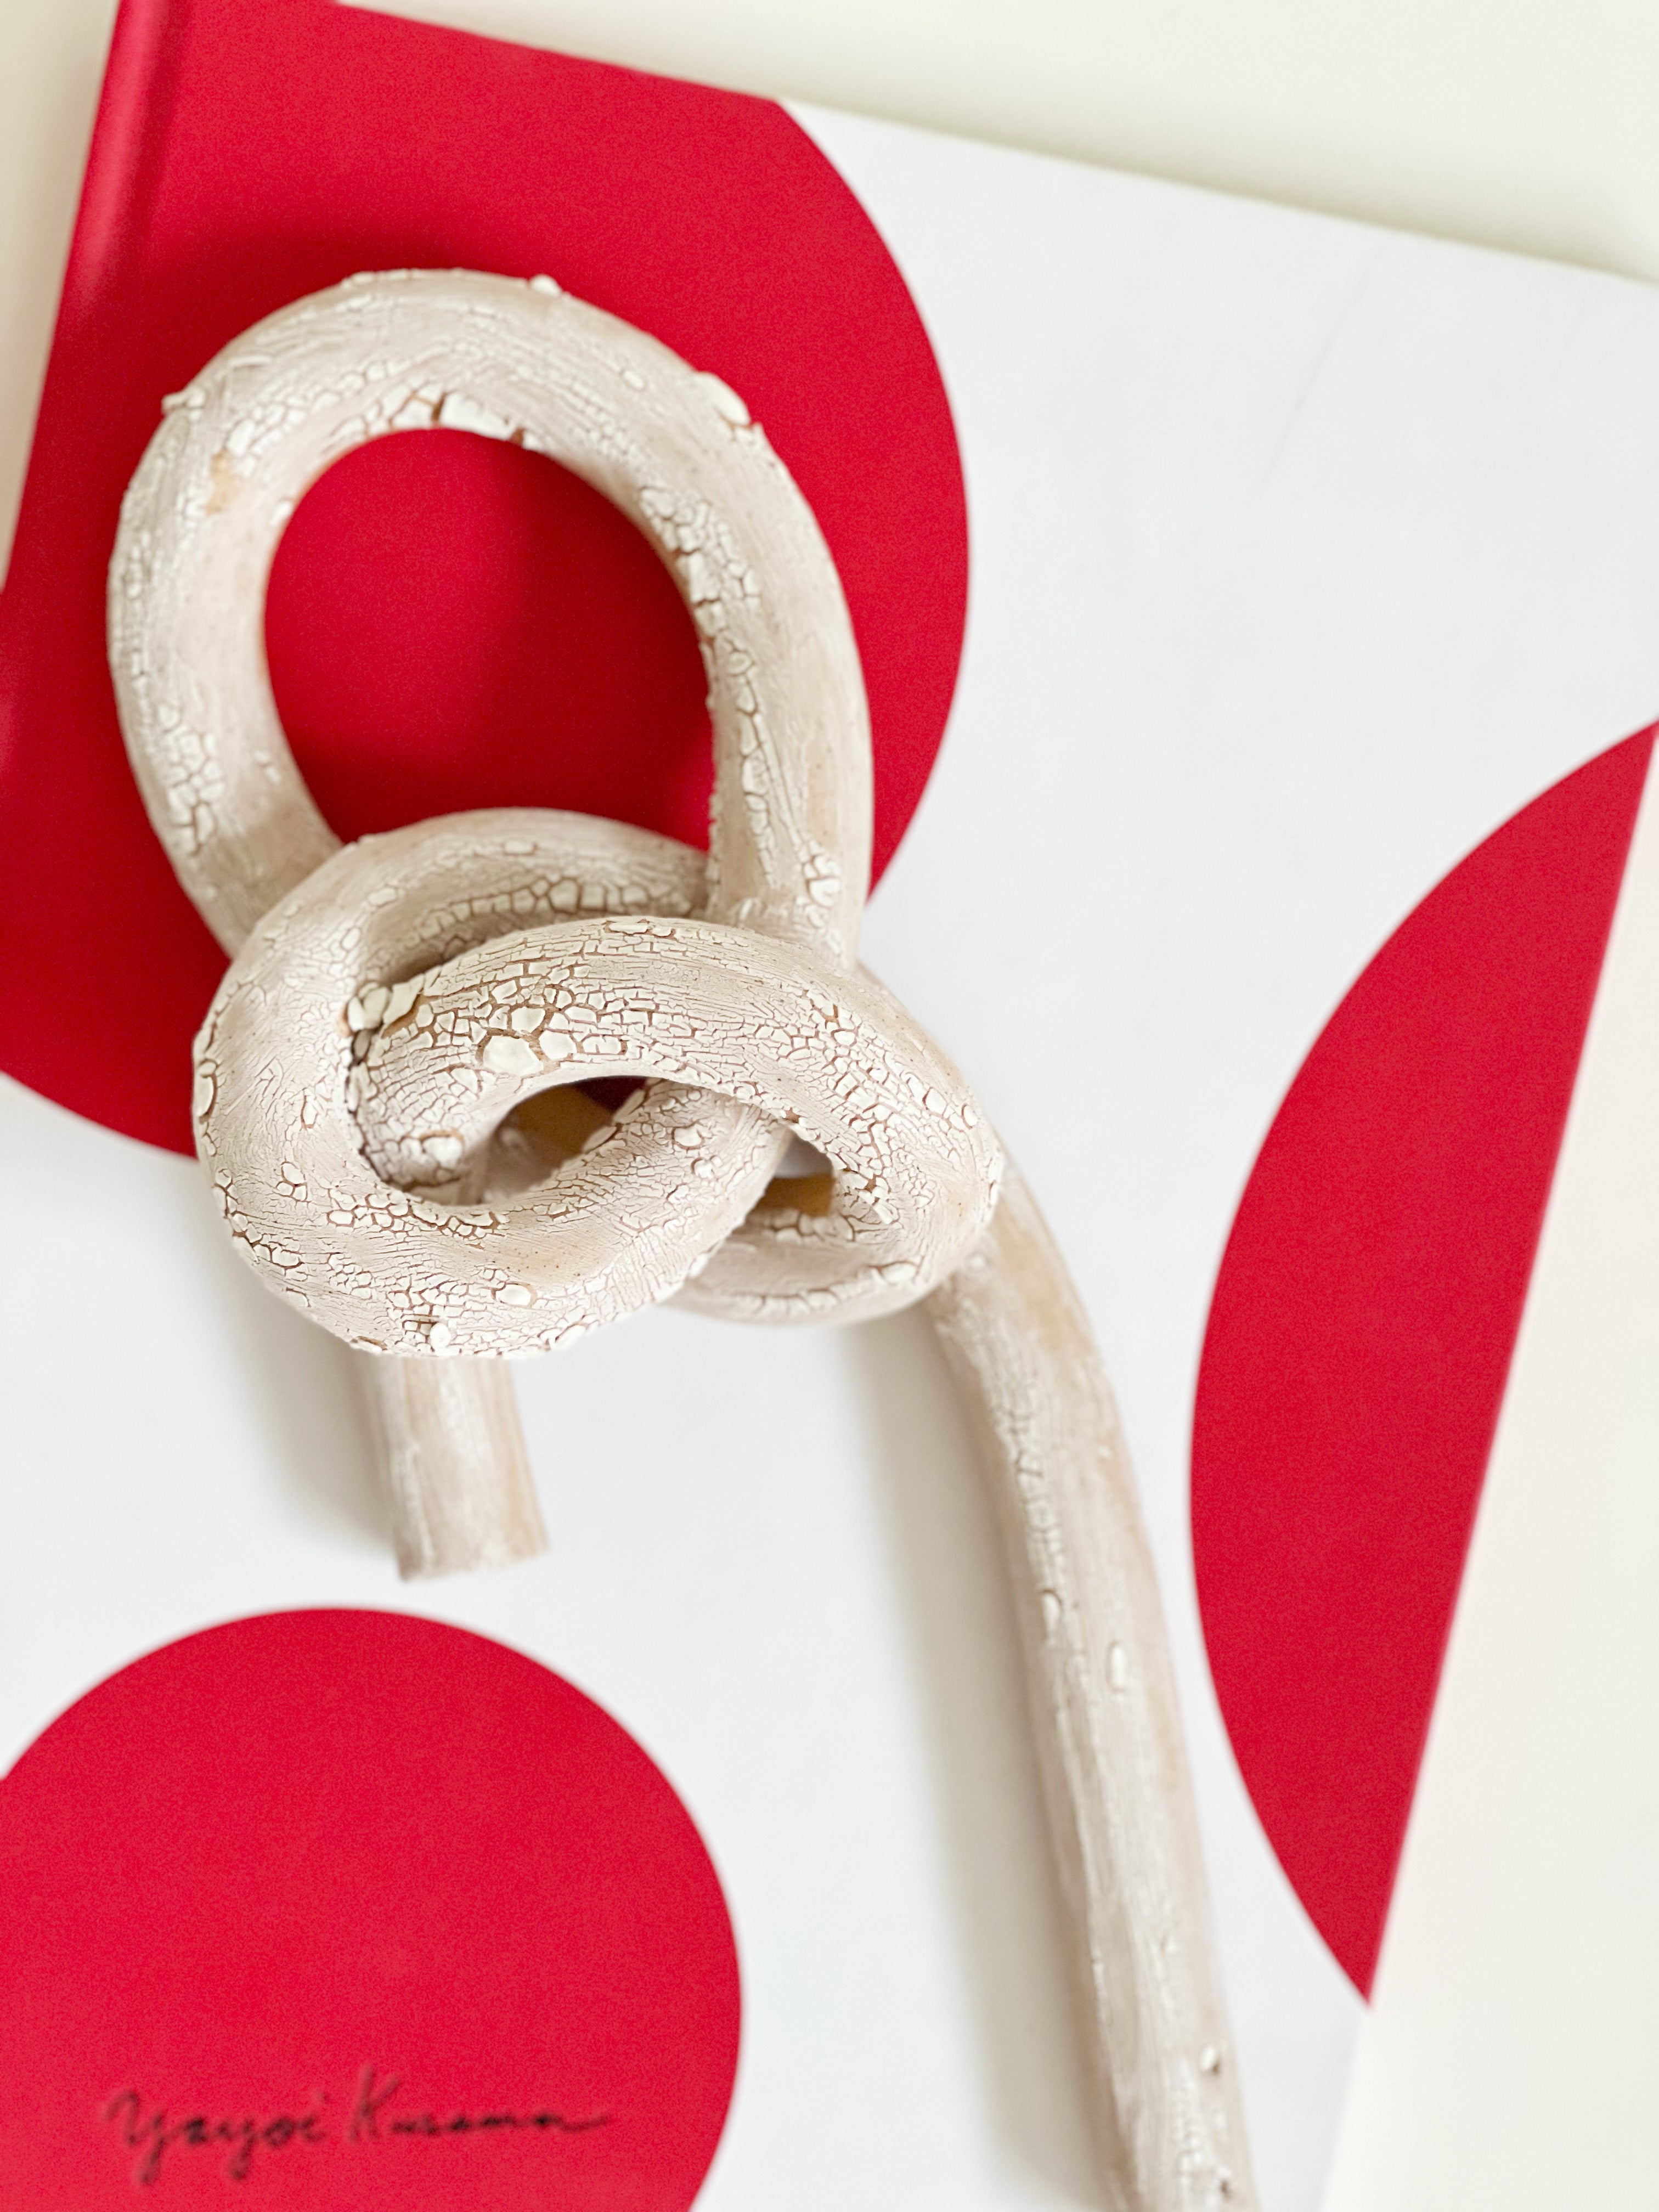 Clay Object 86- White Balance Knot